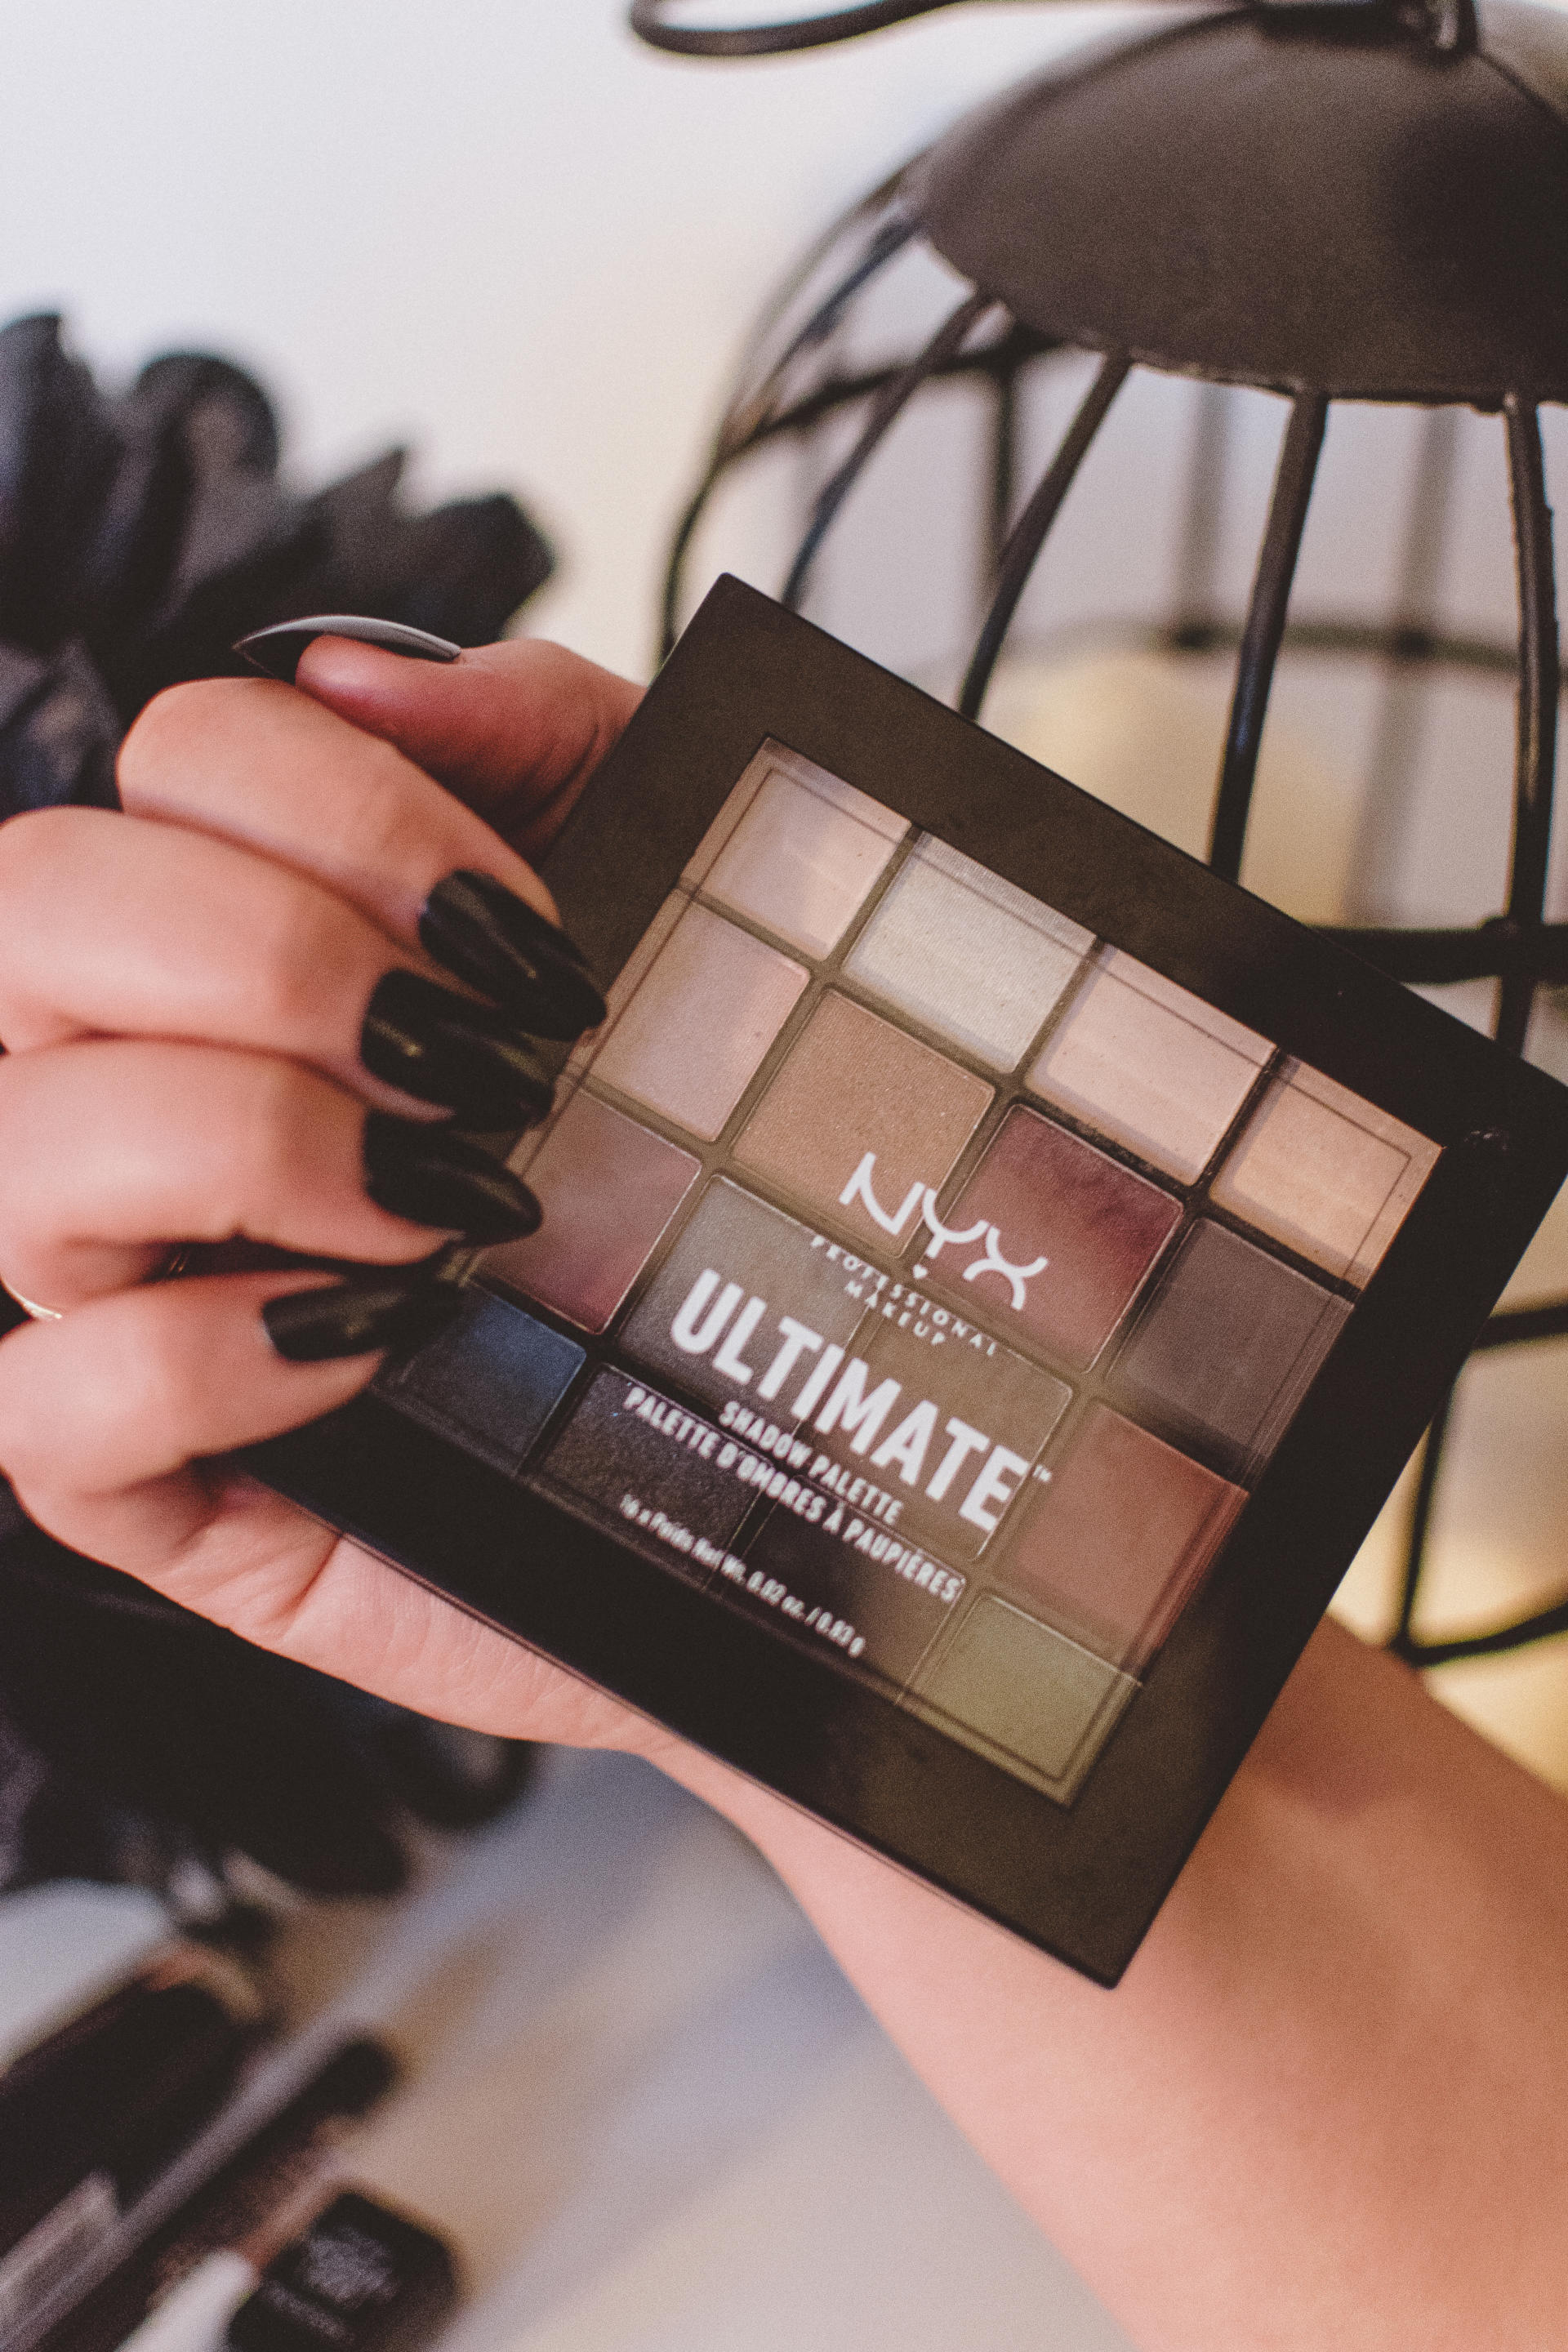 NYX Professional Makeup Ultimate Eyeshadow Palette in Smokey Review